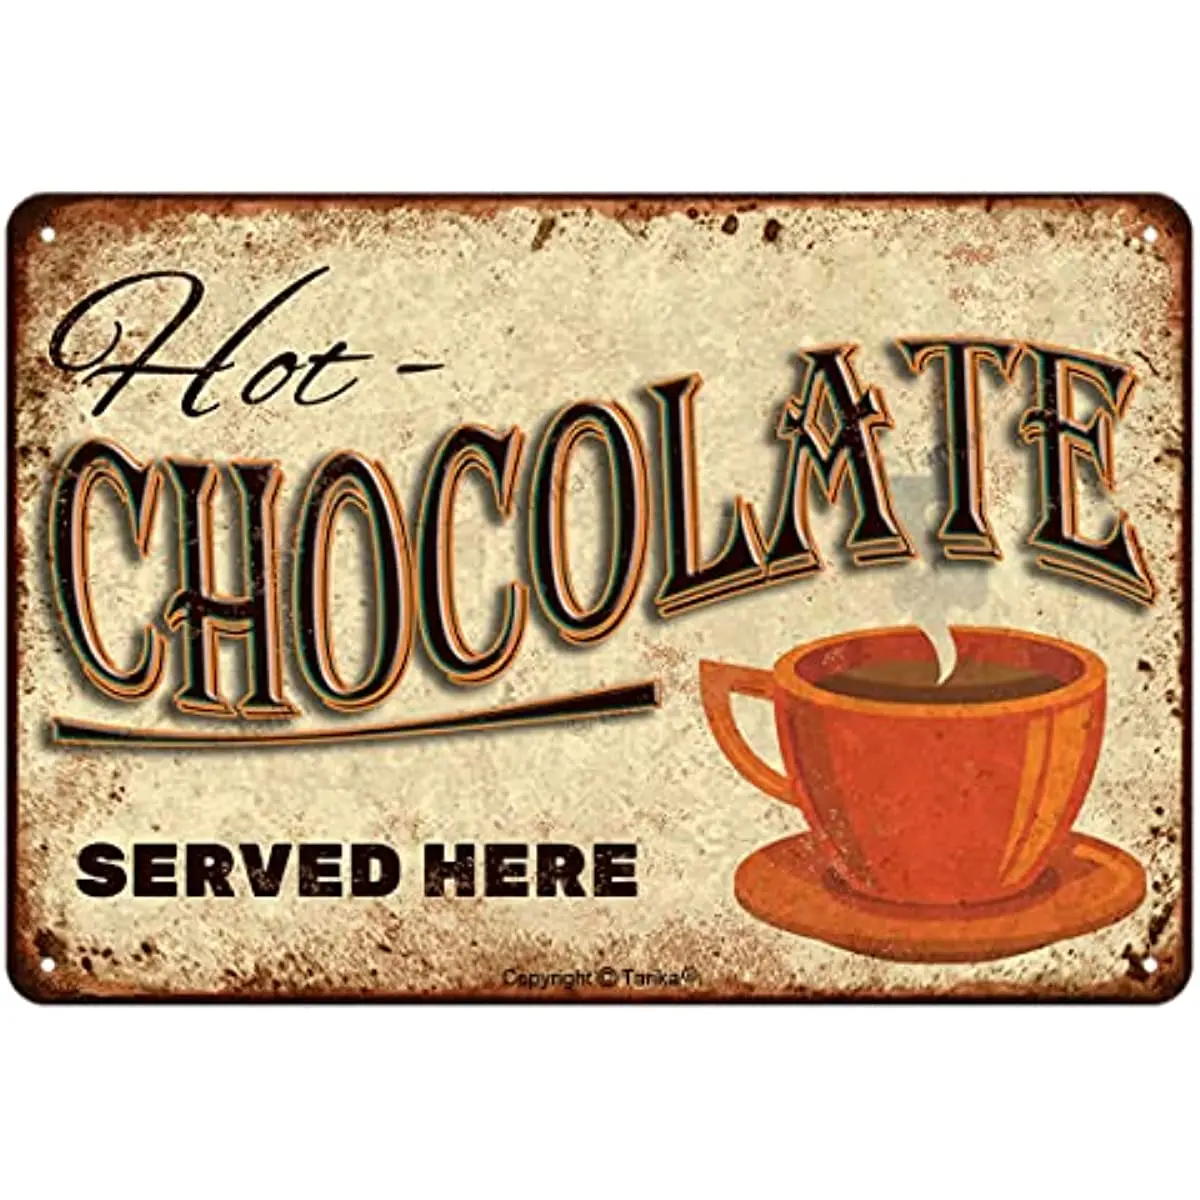 

Hot Chocolate Served Here Iron Poster Painting Tin Sign Vintage Wall Decor for Cafe Bar Pub Home Beer Decoration Crafts